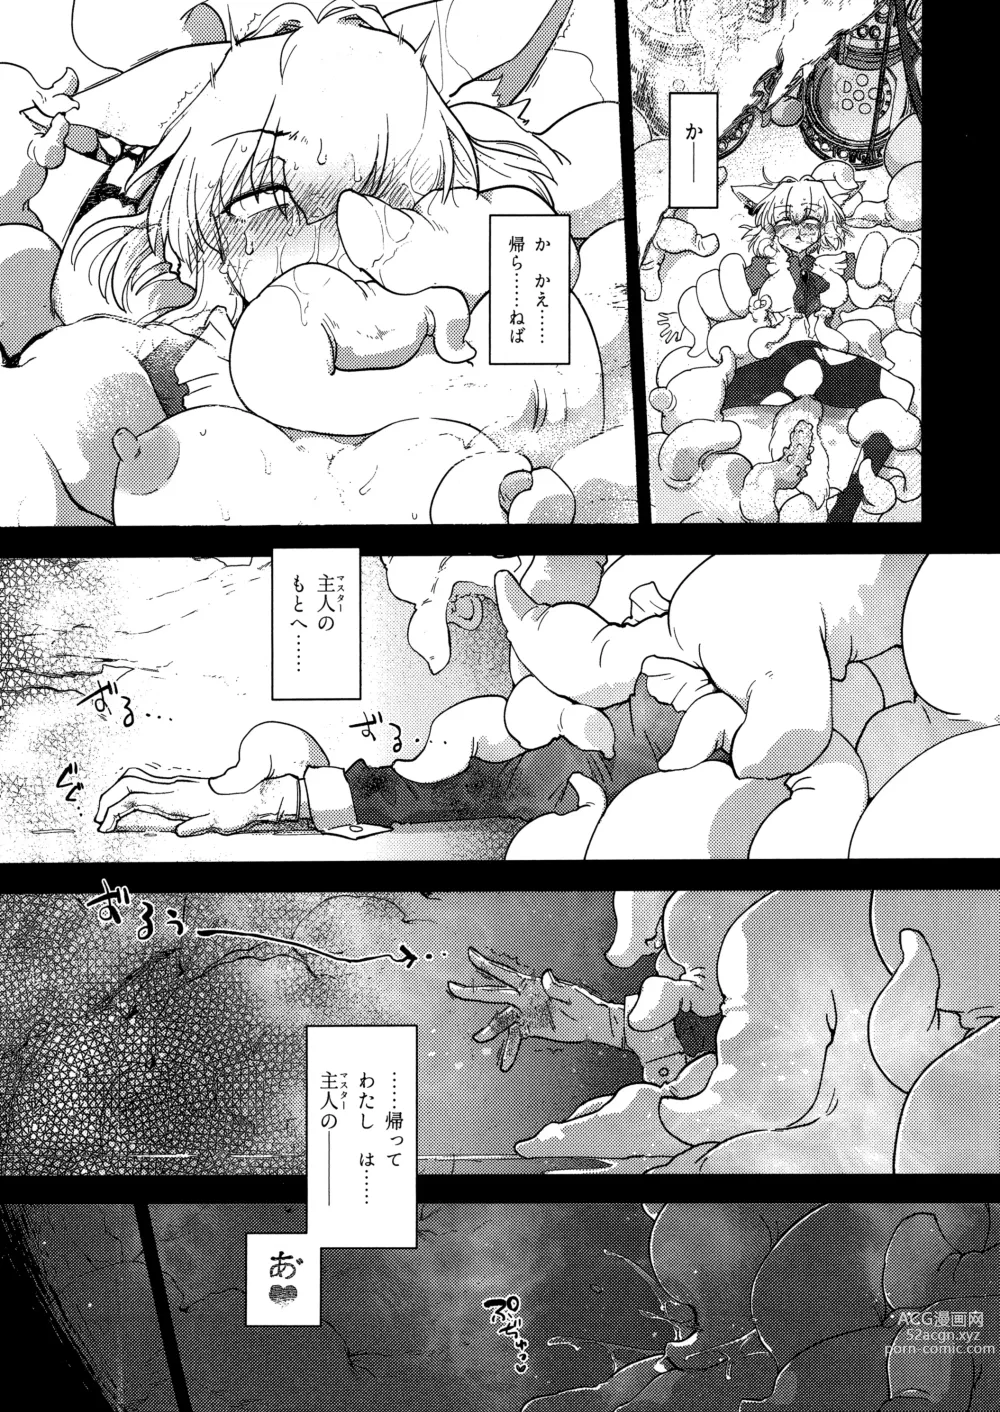 Page 48 of doujinshi Wolf in sheeps clothing in Tentacles